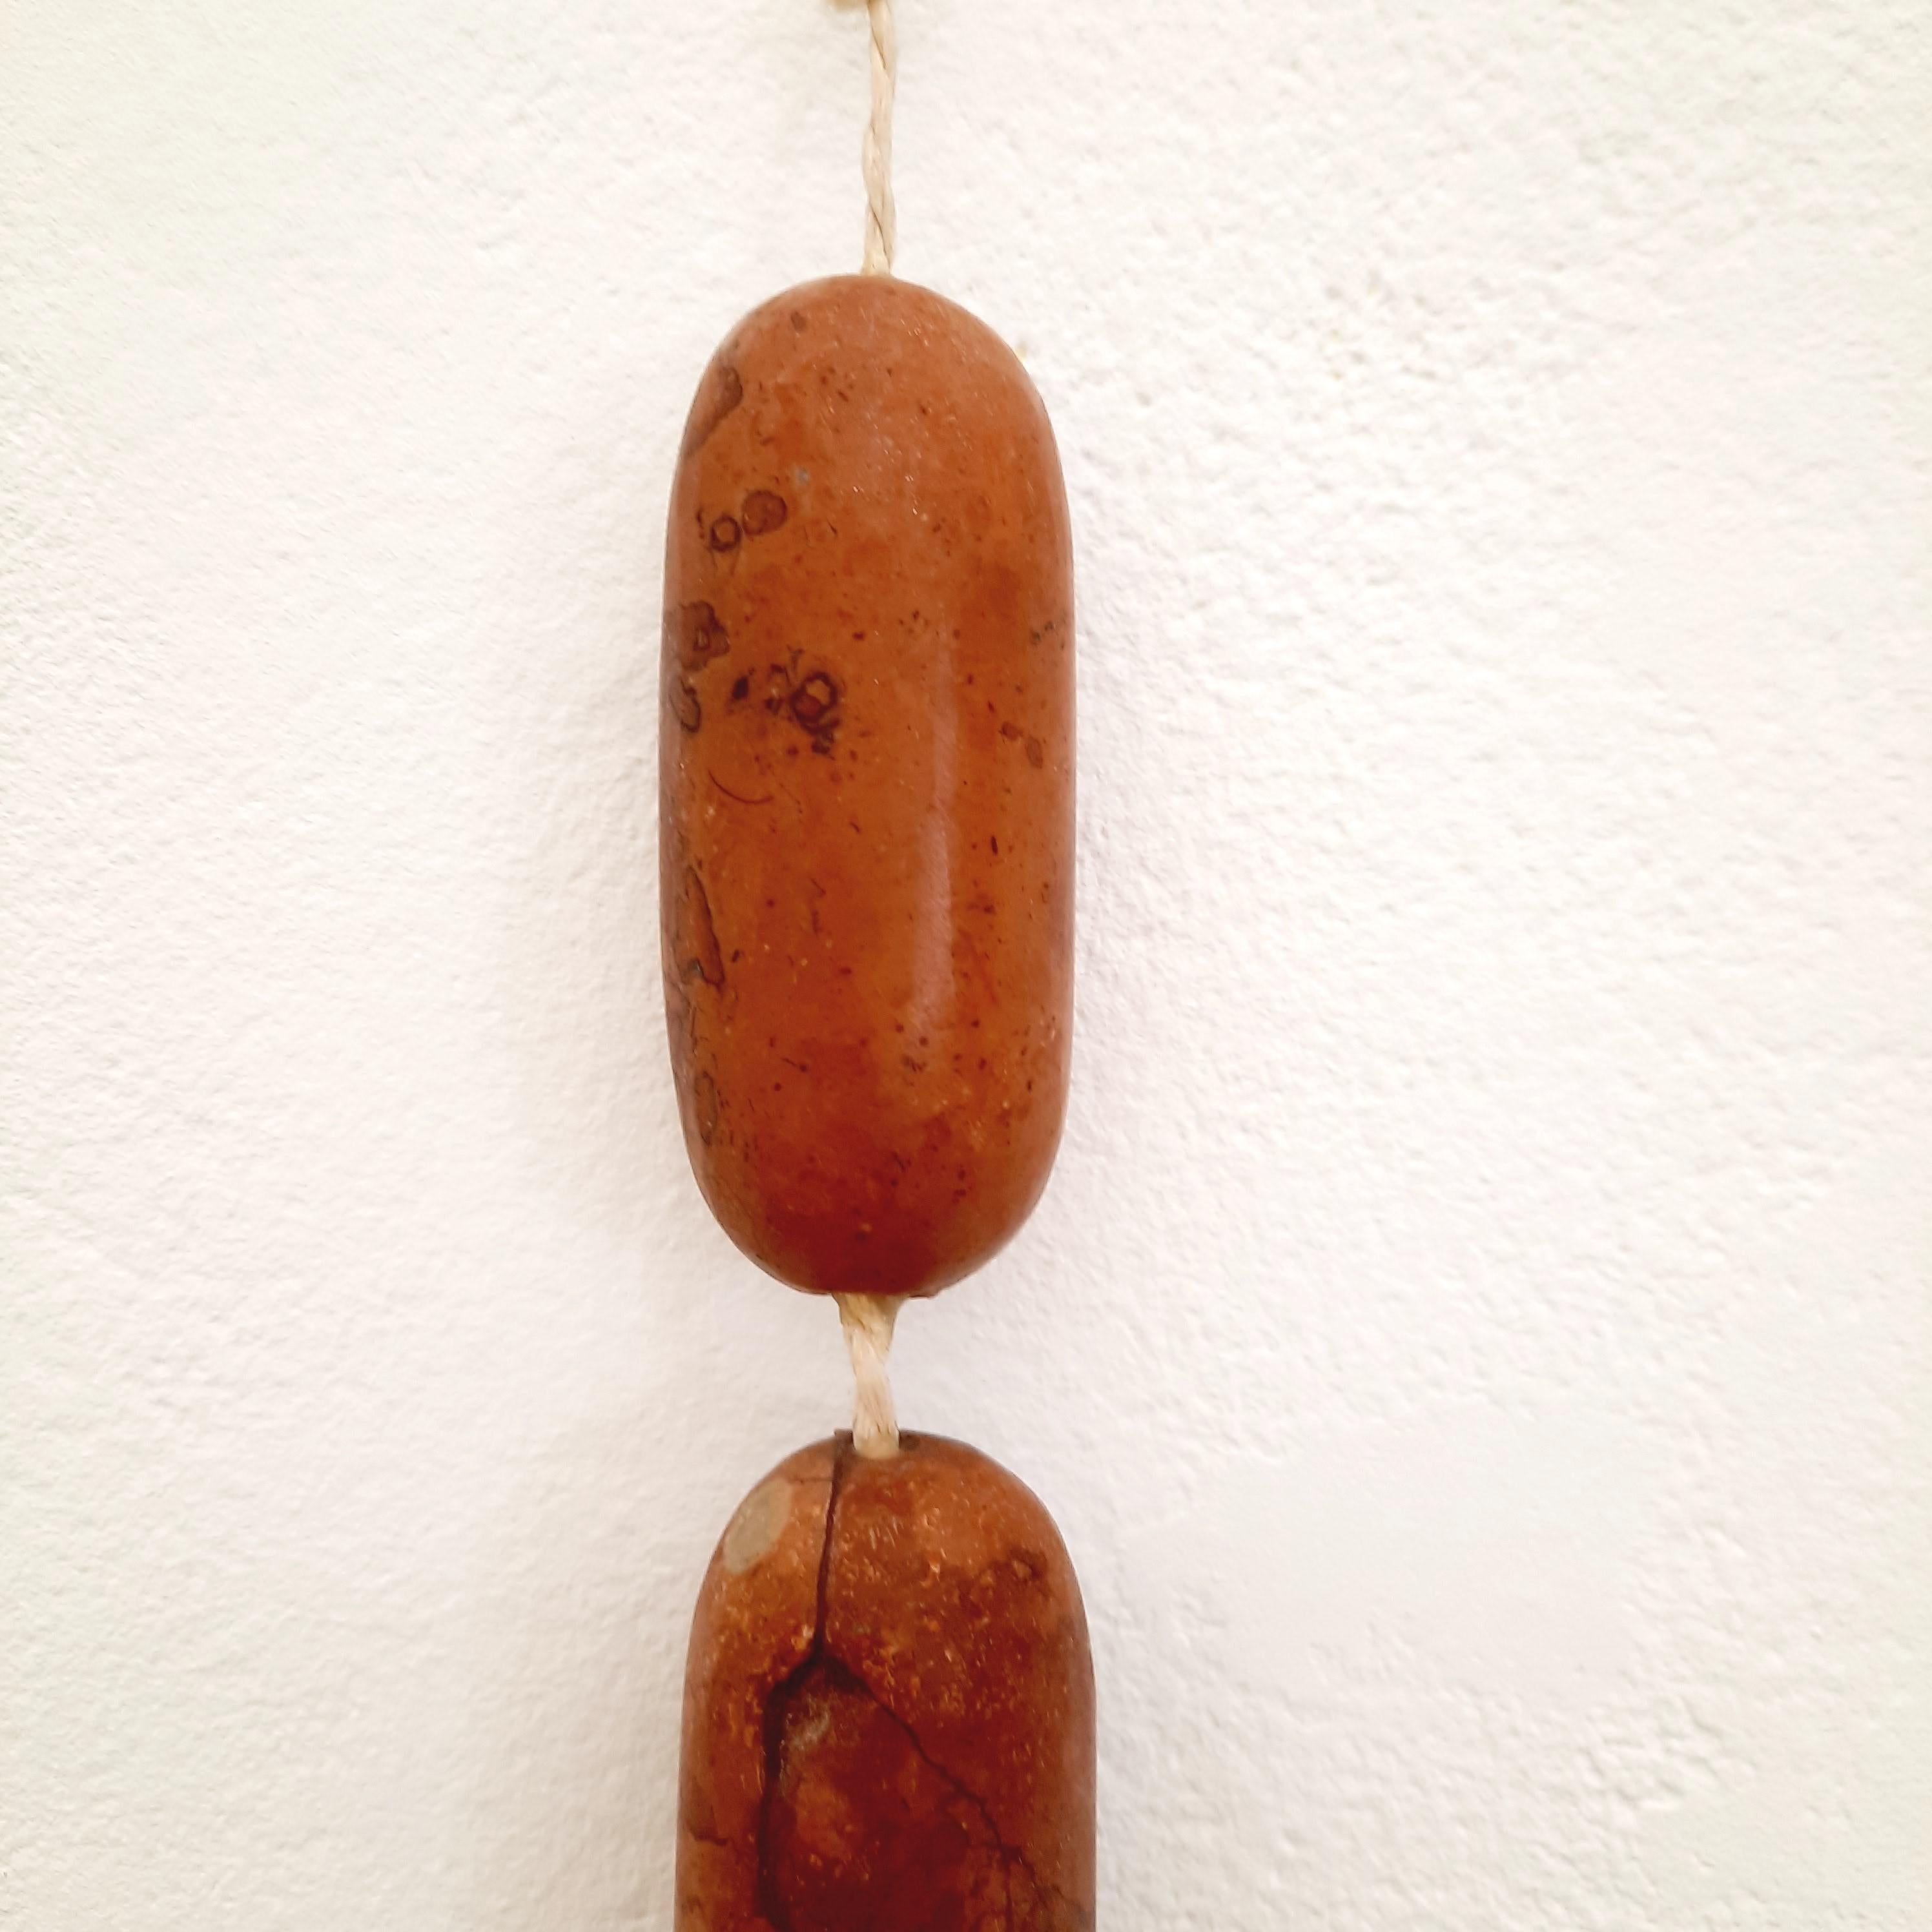 Taro Meissner
Appetizer (Knackerkette) - 21st Century Figurative Still-life Sculpture Marble
2018
48 x 4 cm
Unique Copy

Taro Meissner is hanging up heavy sausages, wishing to share with you the latest results of his research on the sensible